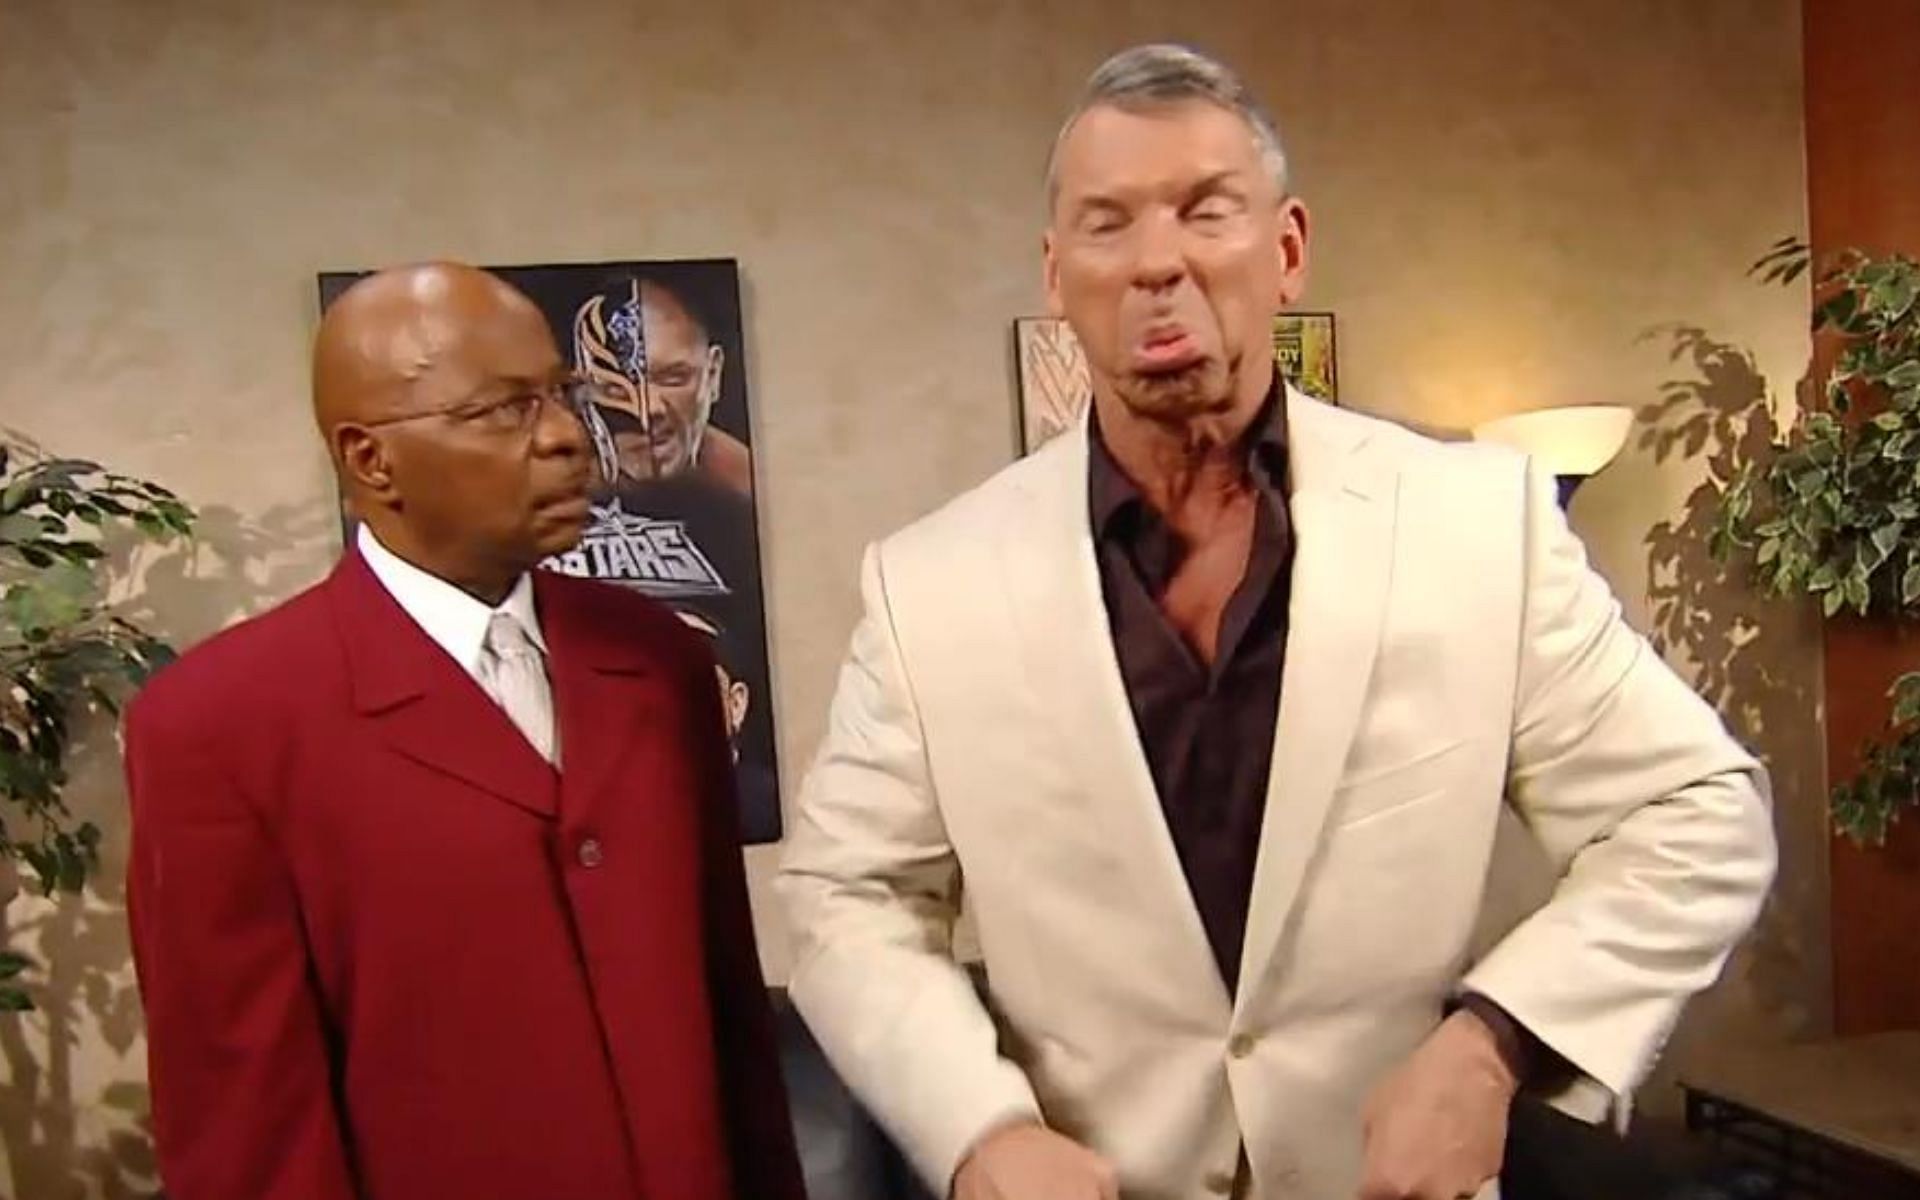 The former SmakDown GM had a good relationship with McMahon